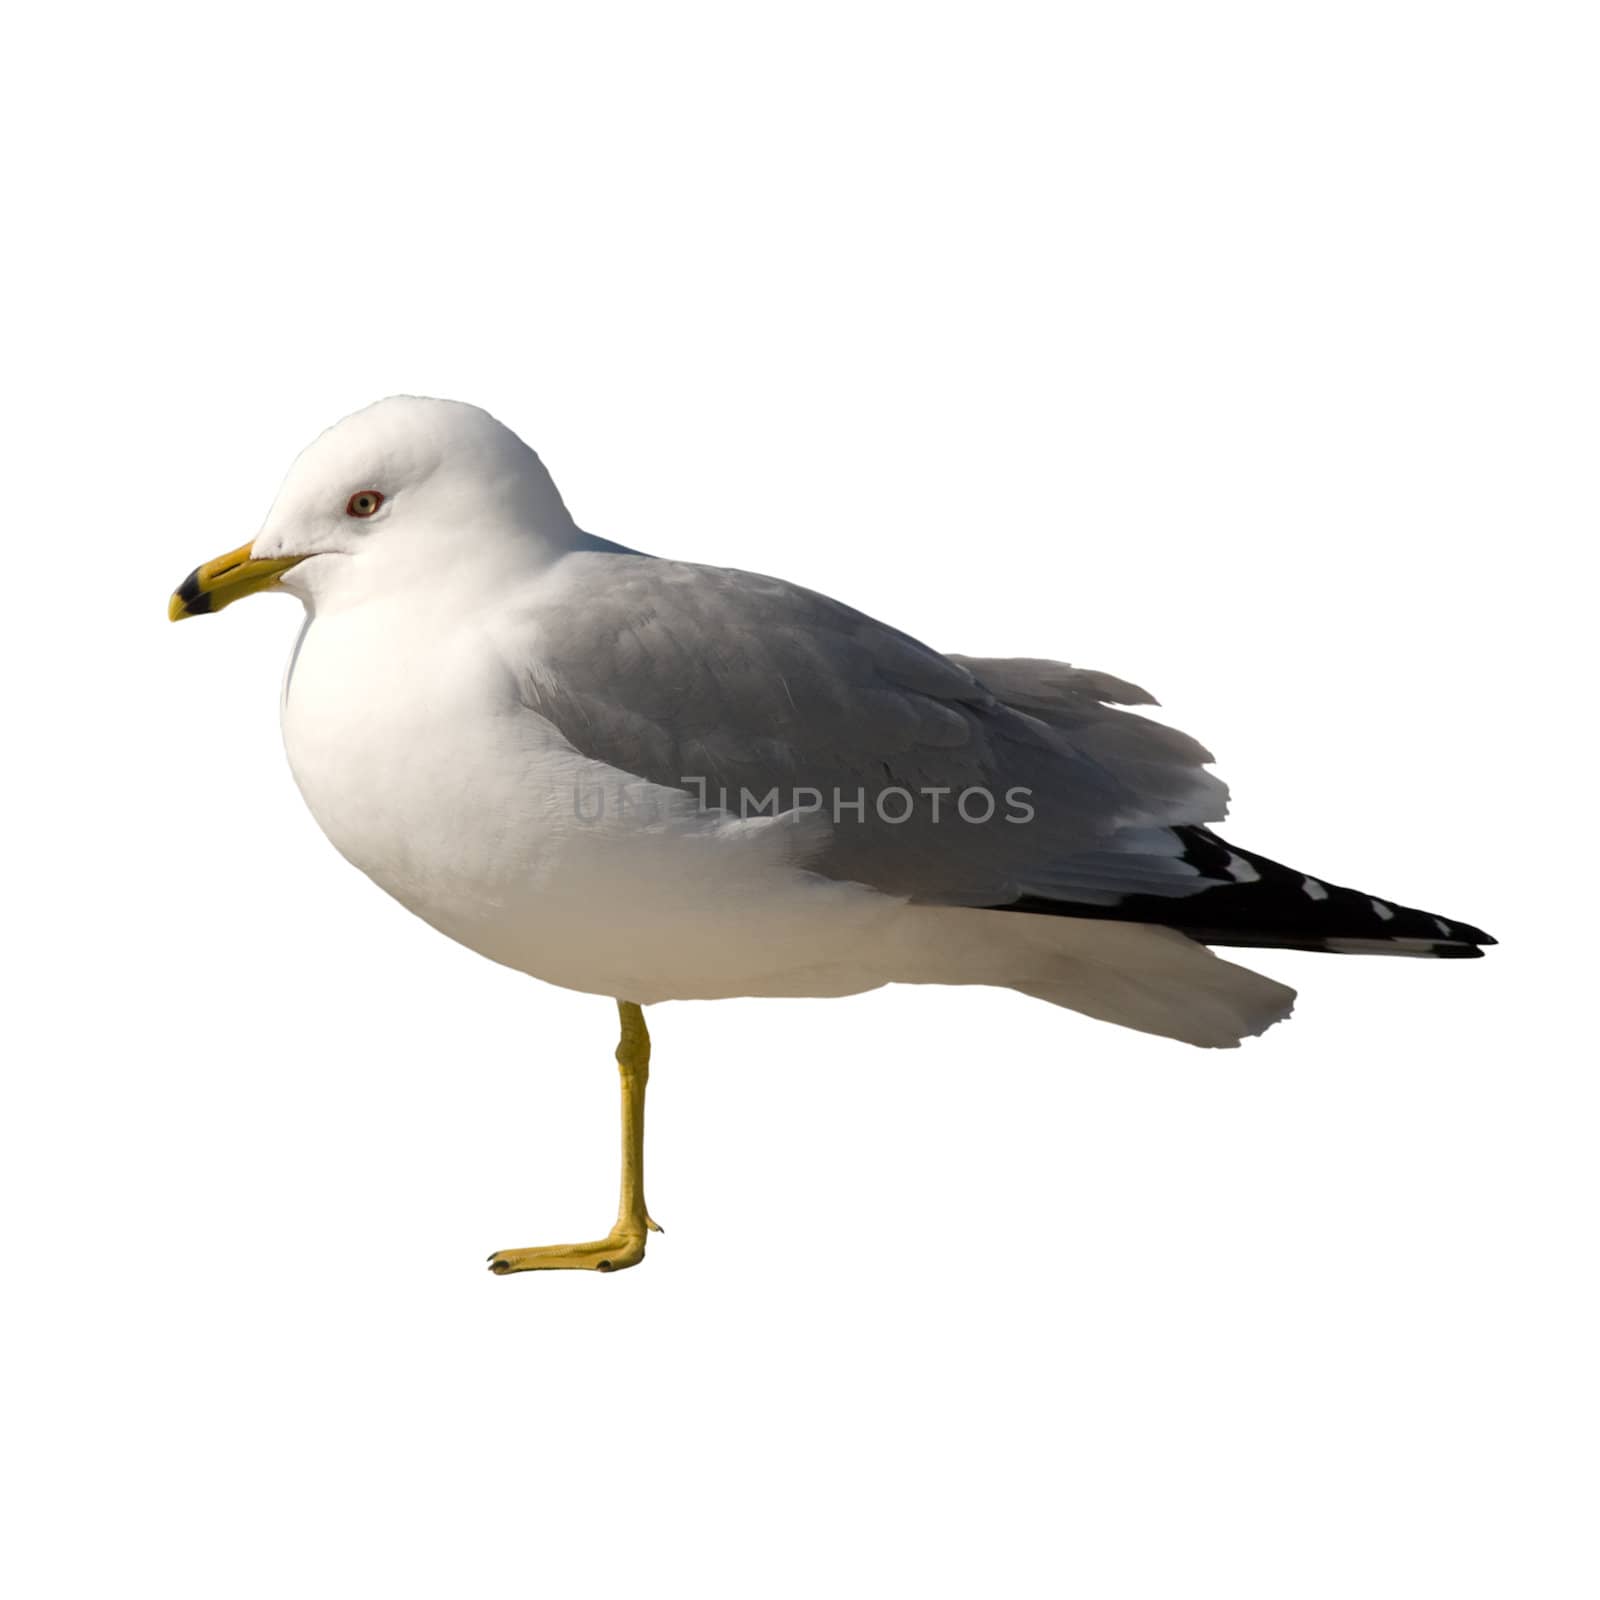 An injured seagull isolated against a white background